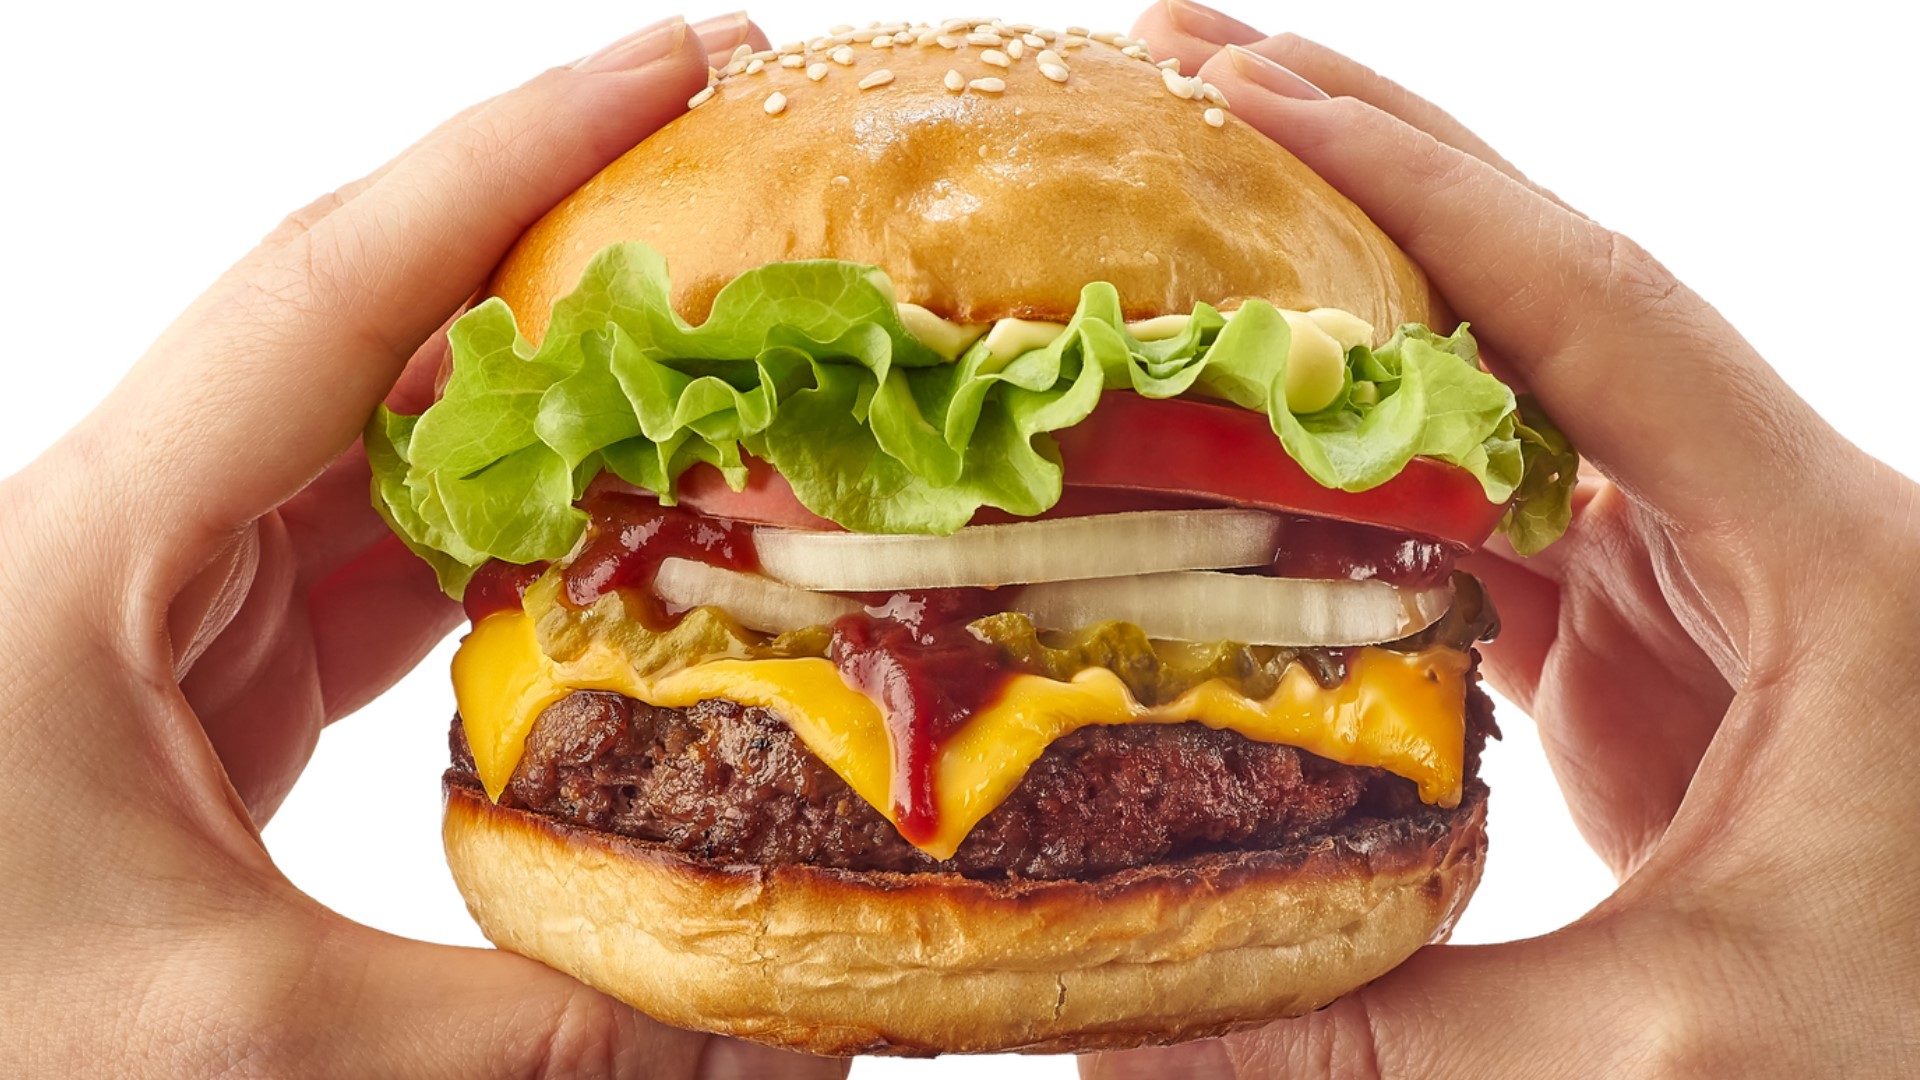 Sept. 18, 2020: It's National Cheeseburger Day! What is your favorite place to get a cheeseburger?